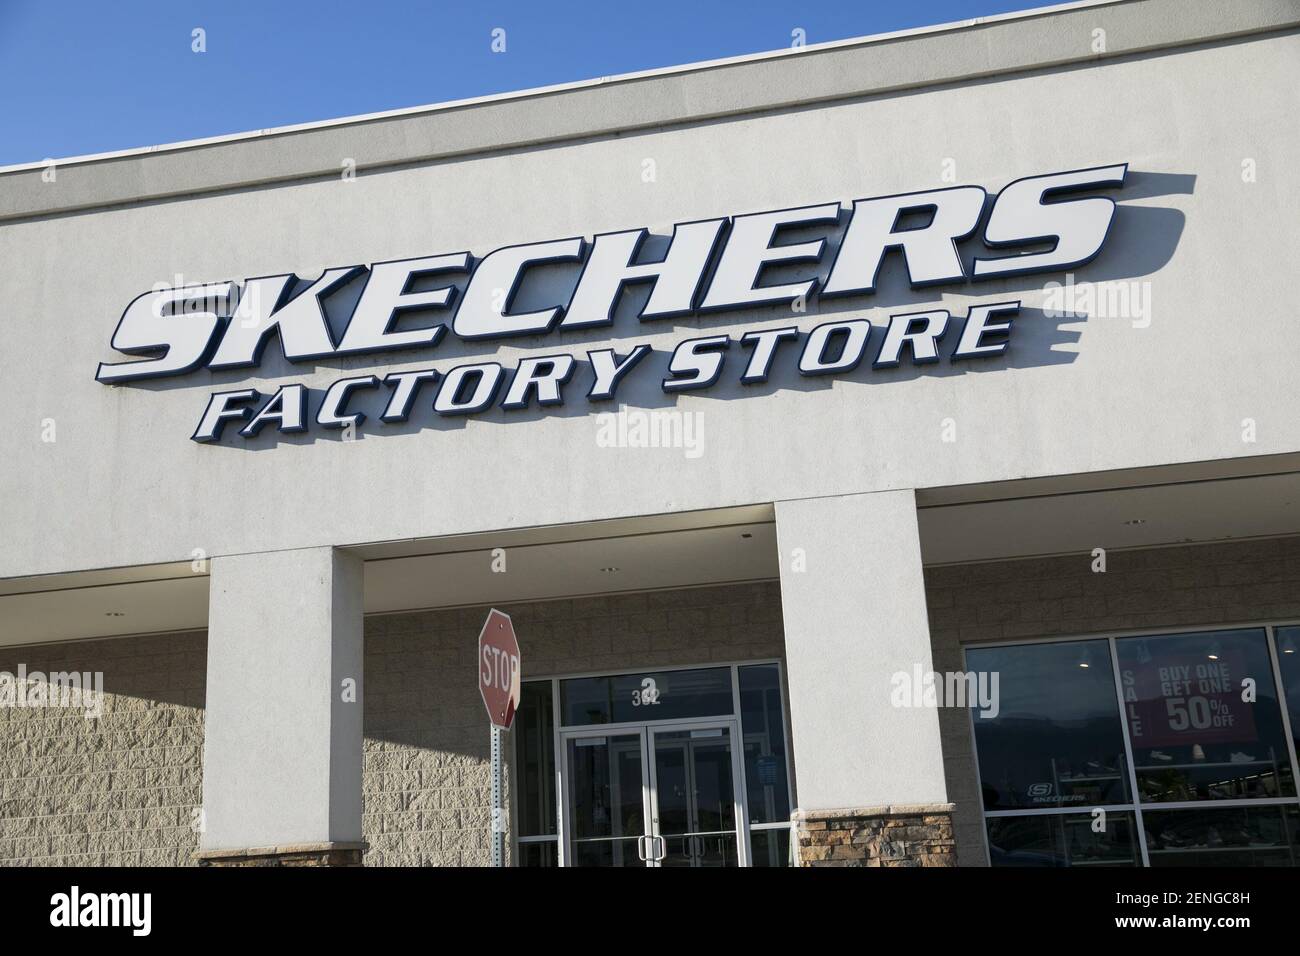 A logo sign outside of a Skechers Factory Store retail store location Orem, Utah on July 29, 2019 Stock Photo - Alamy